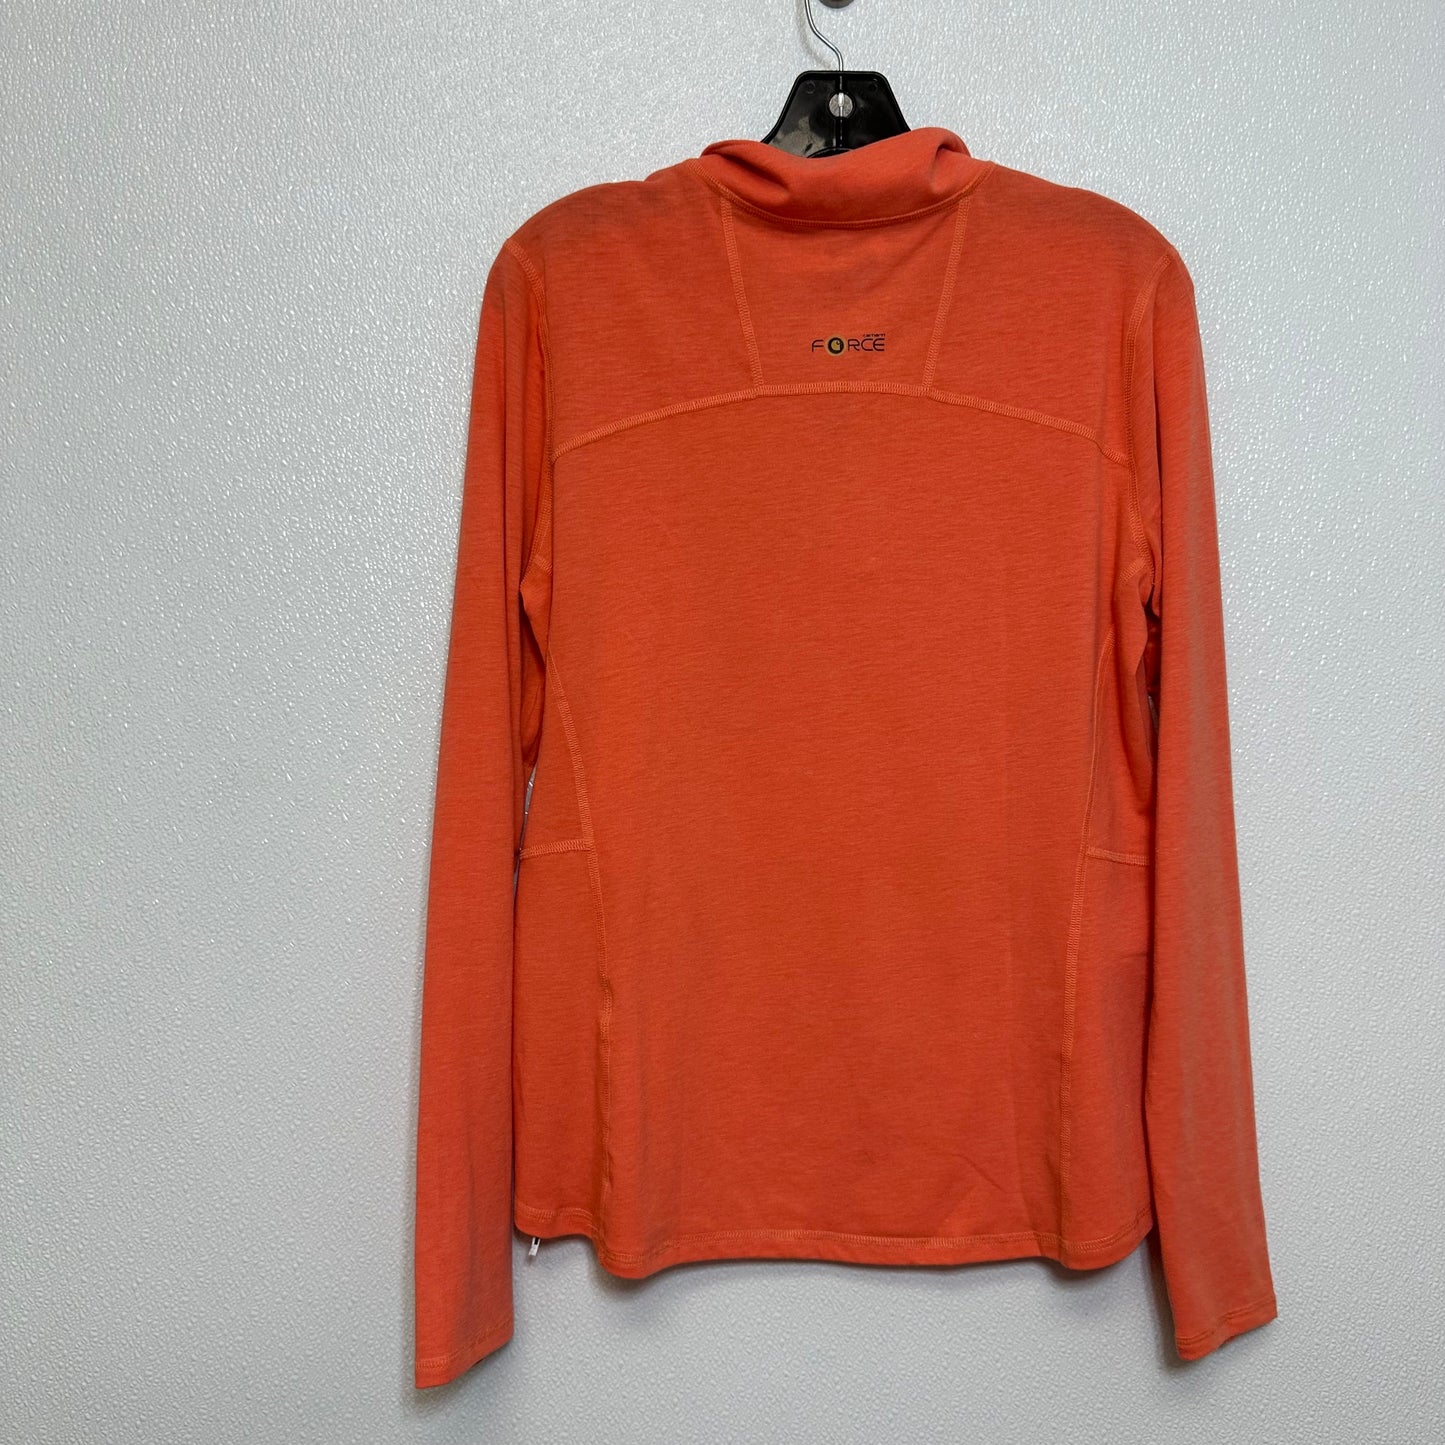 Athletic Top Long Sleeve Collar By Carhart  Size: M